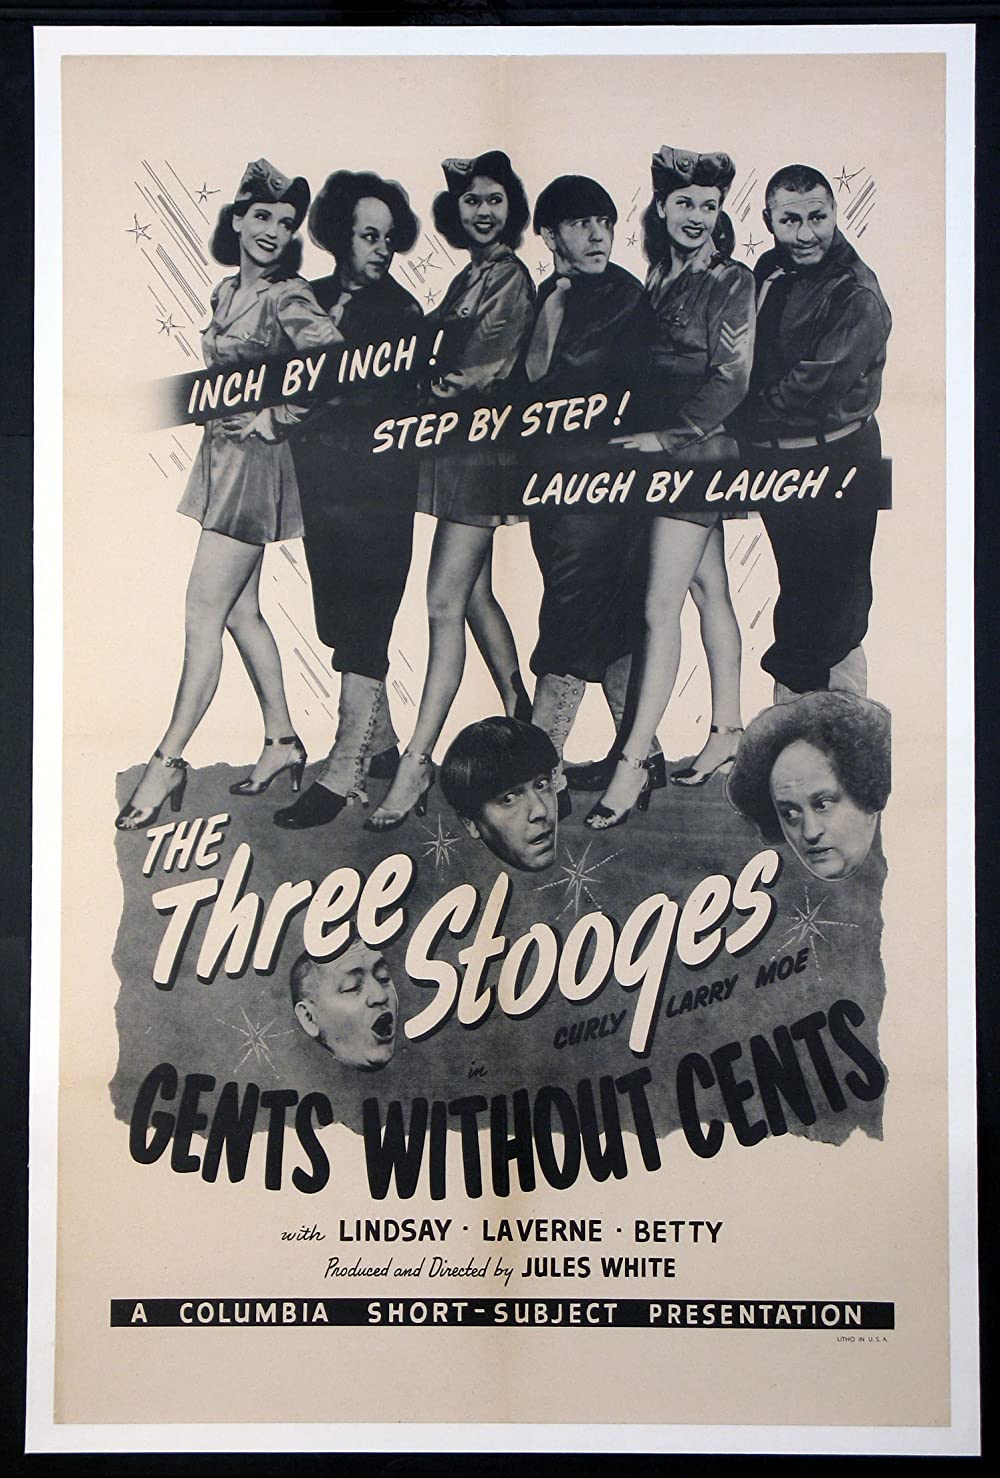 Gents Without Cents (Short 1944)